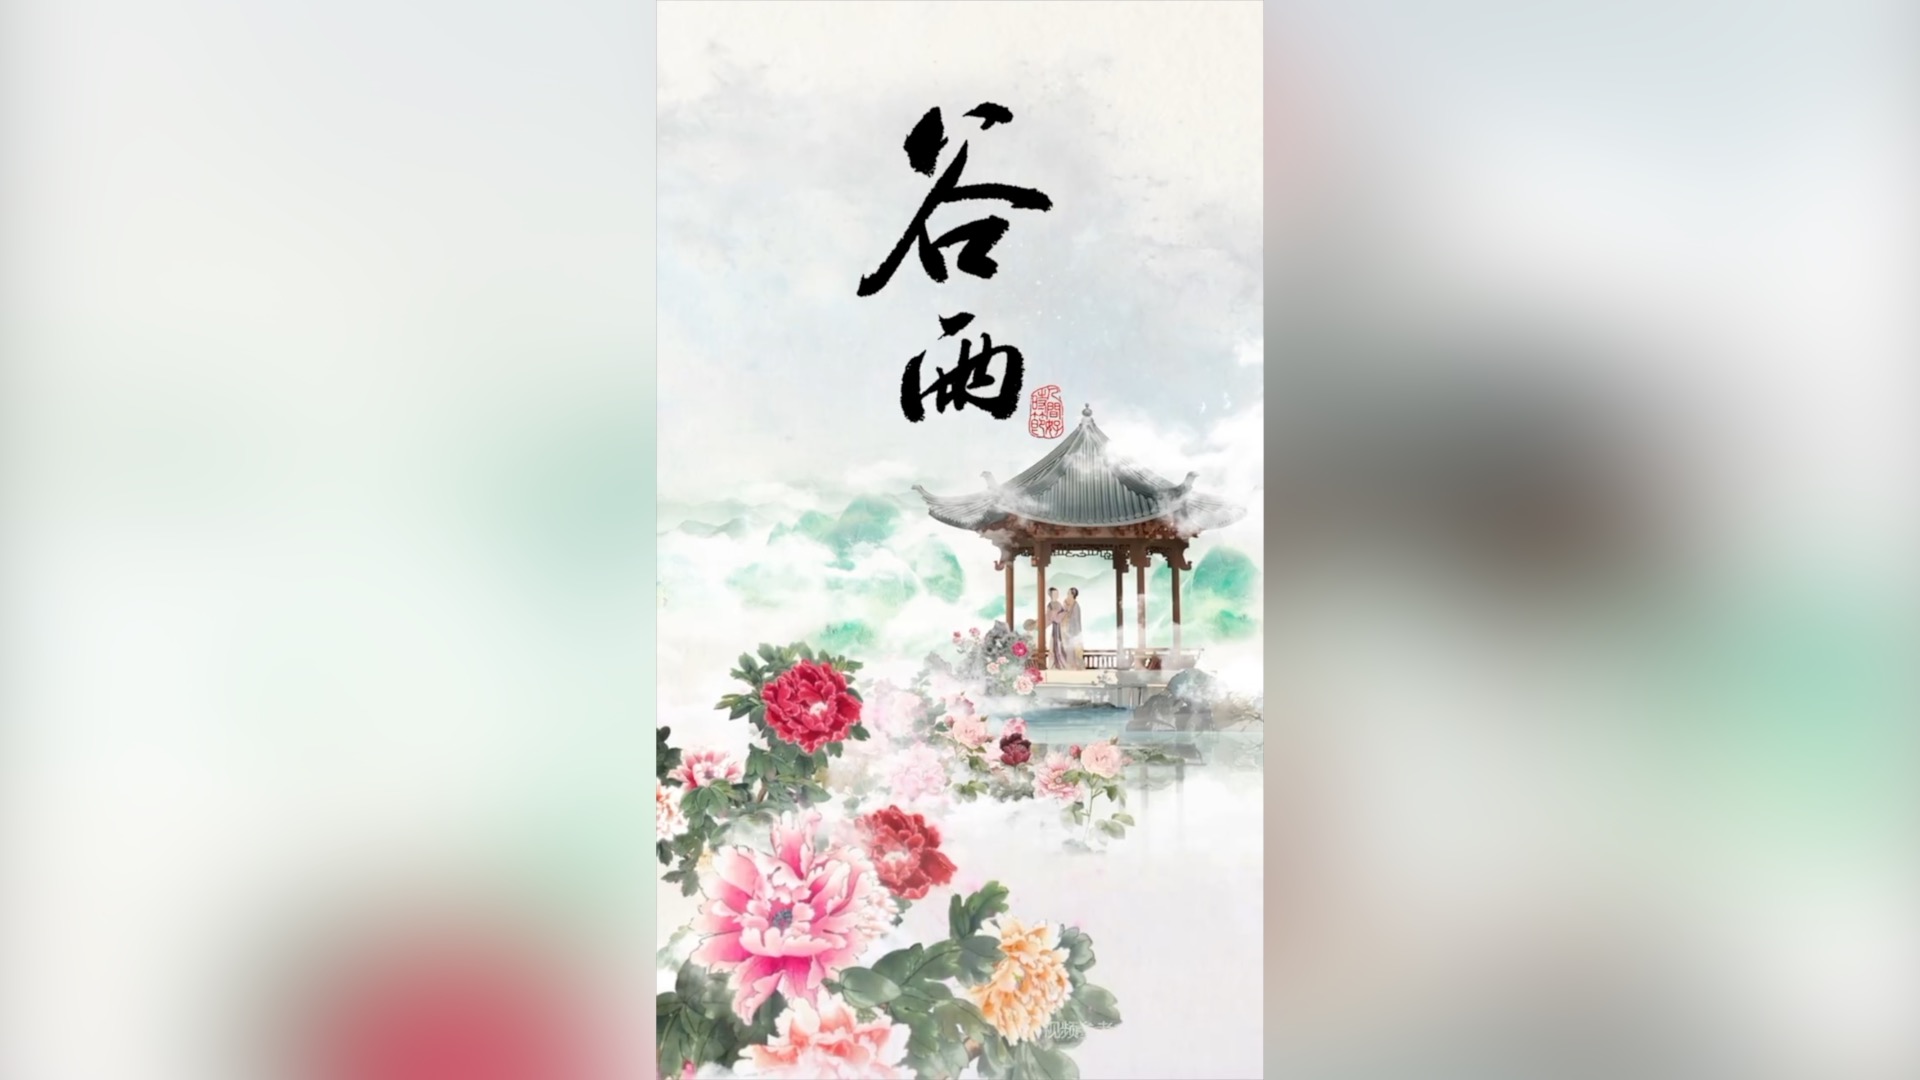 Enjoy the traditional beauty of peonies during Guyu period